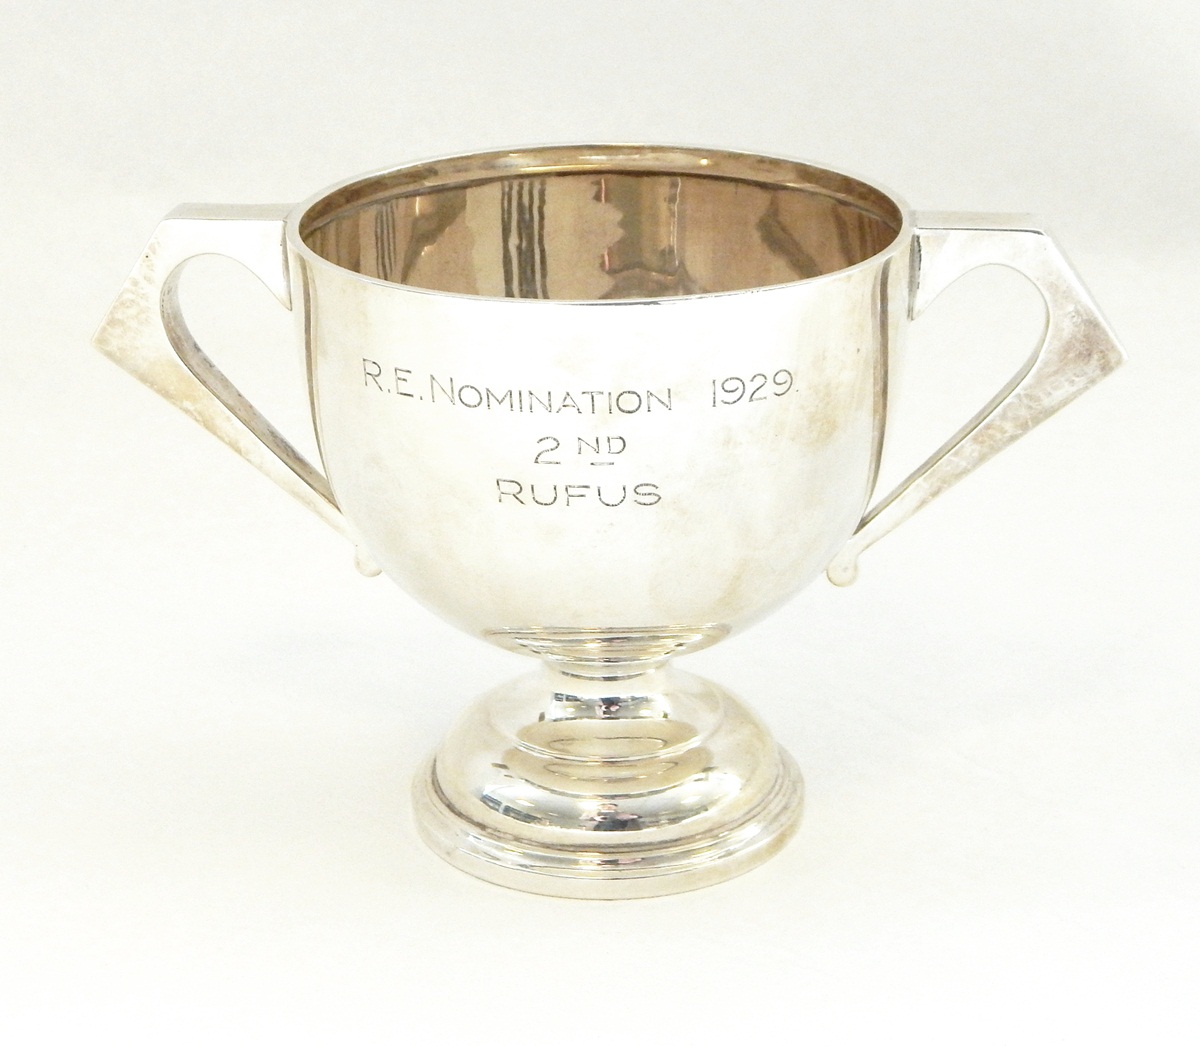 Silver two-handled trophy by H Phillips, London 1928 with presentation inscription, - Image 2 of 4